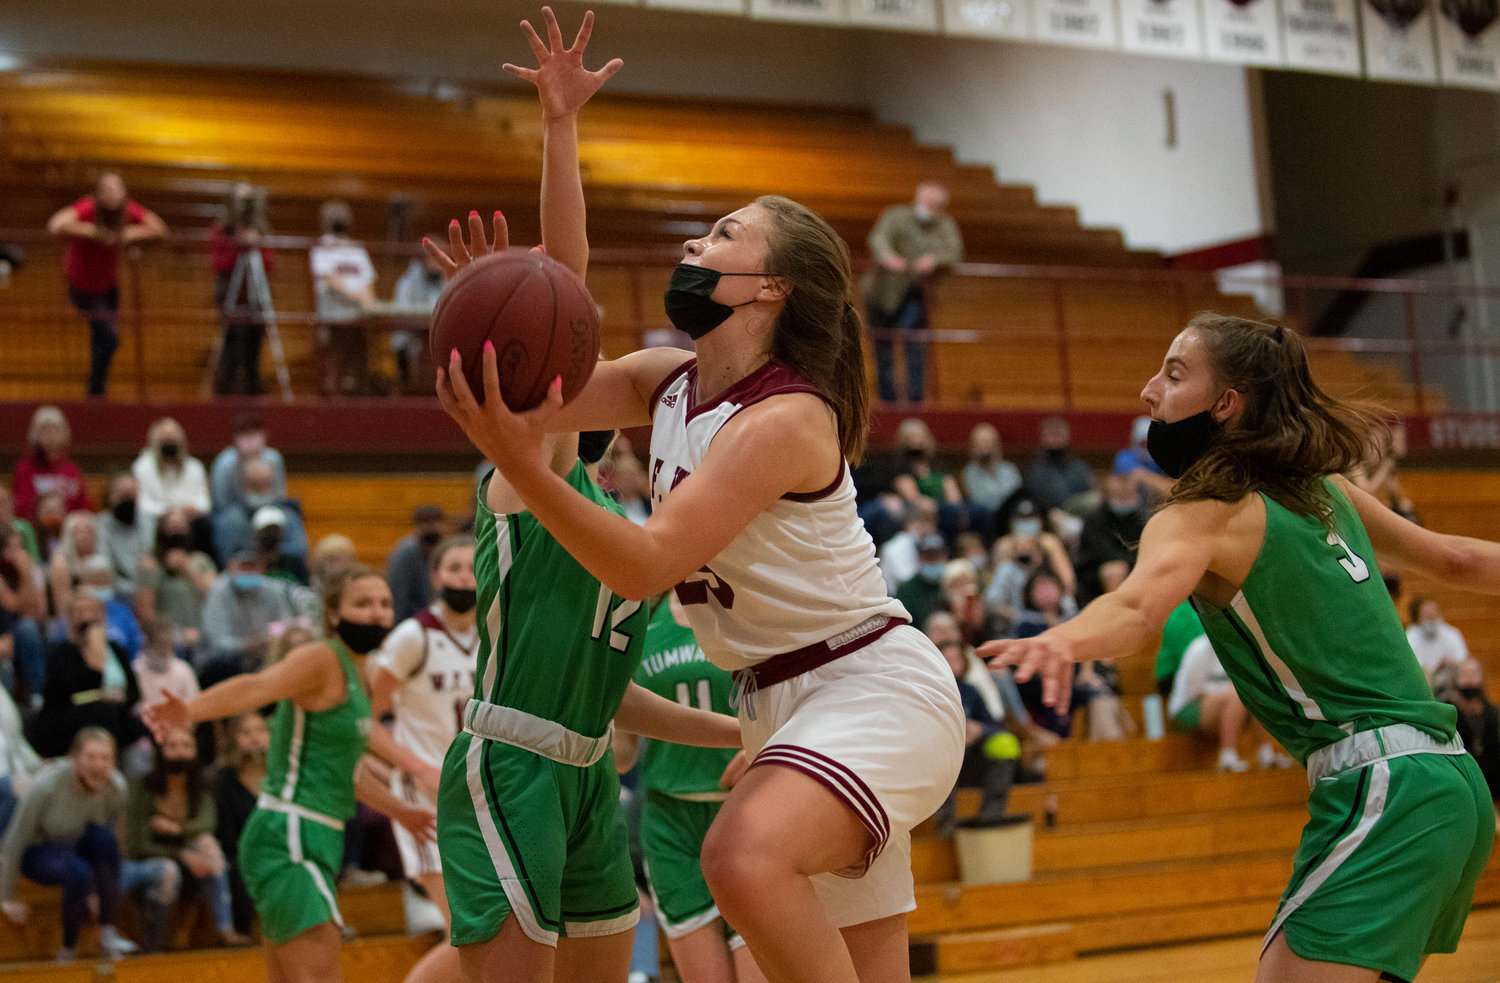 W.F. West's Kyla McCallum drives past two Tumwater defenders on Monday.